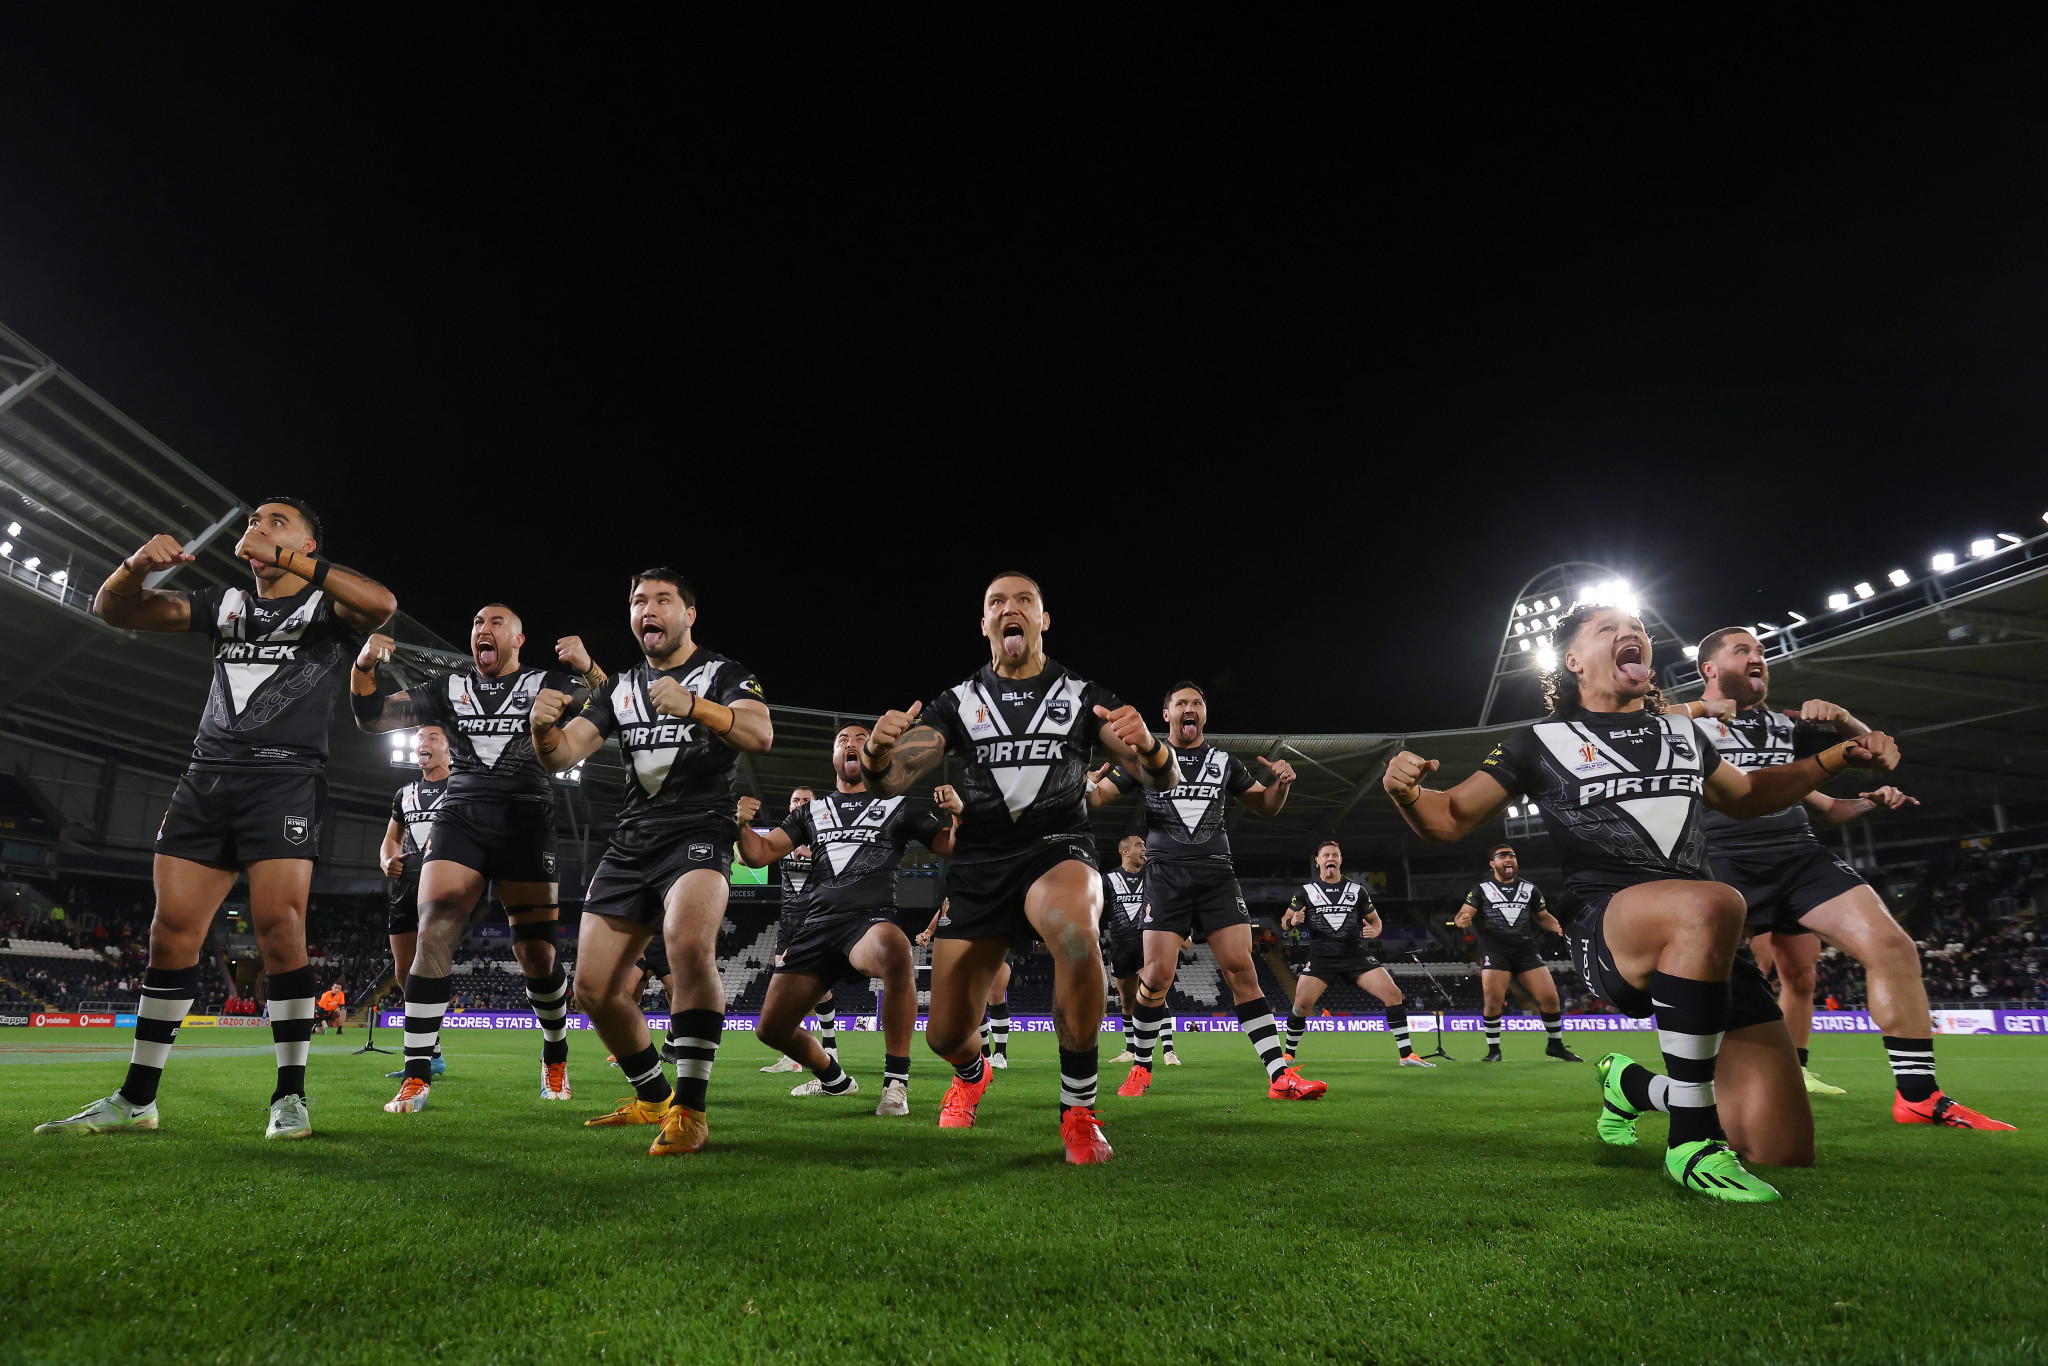 New Zealand has announced interest in hosting the Rugby League World Cup in 2025 ©Getty Images